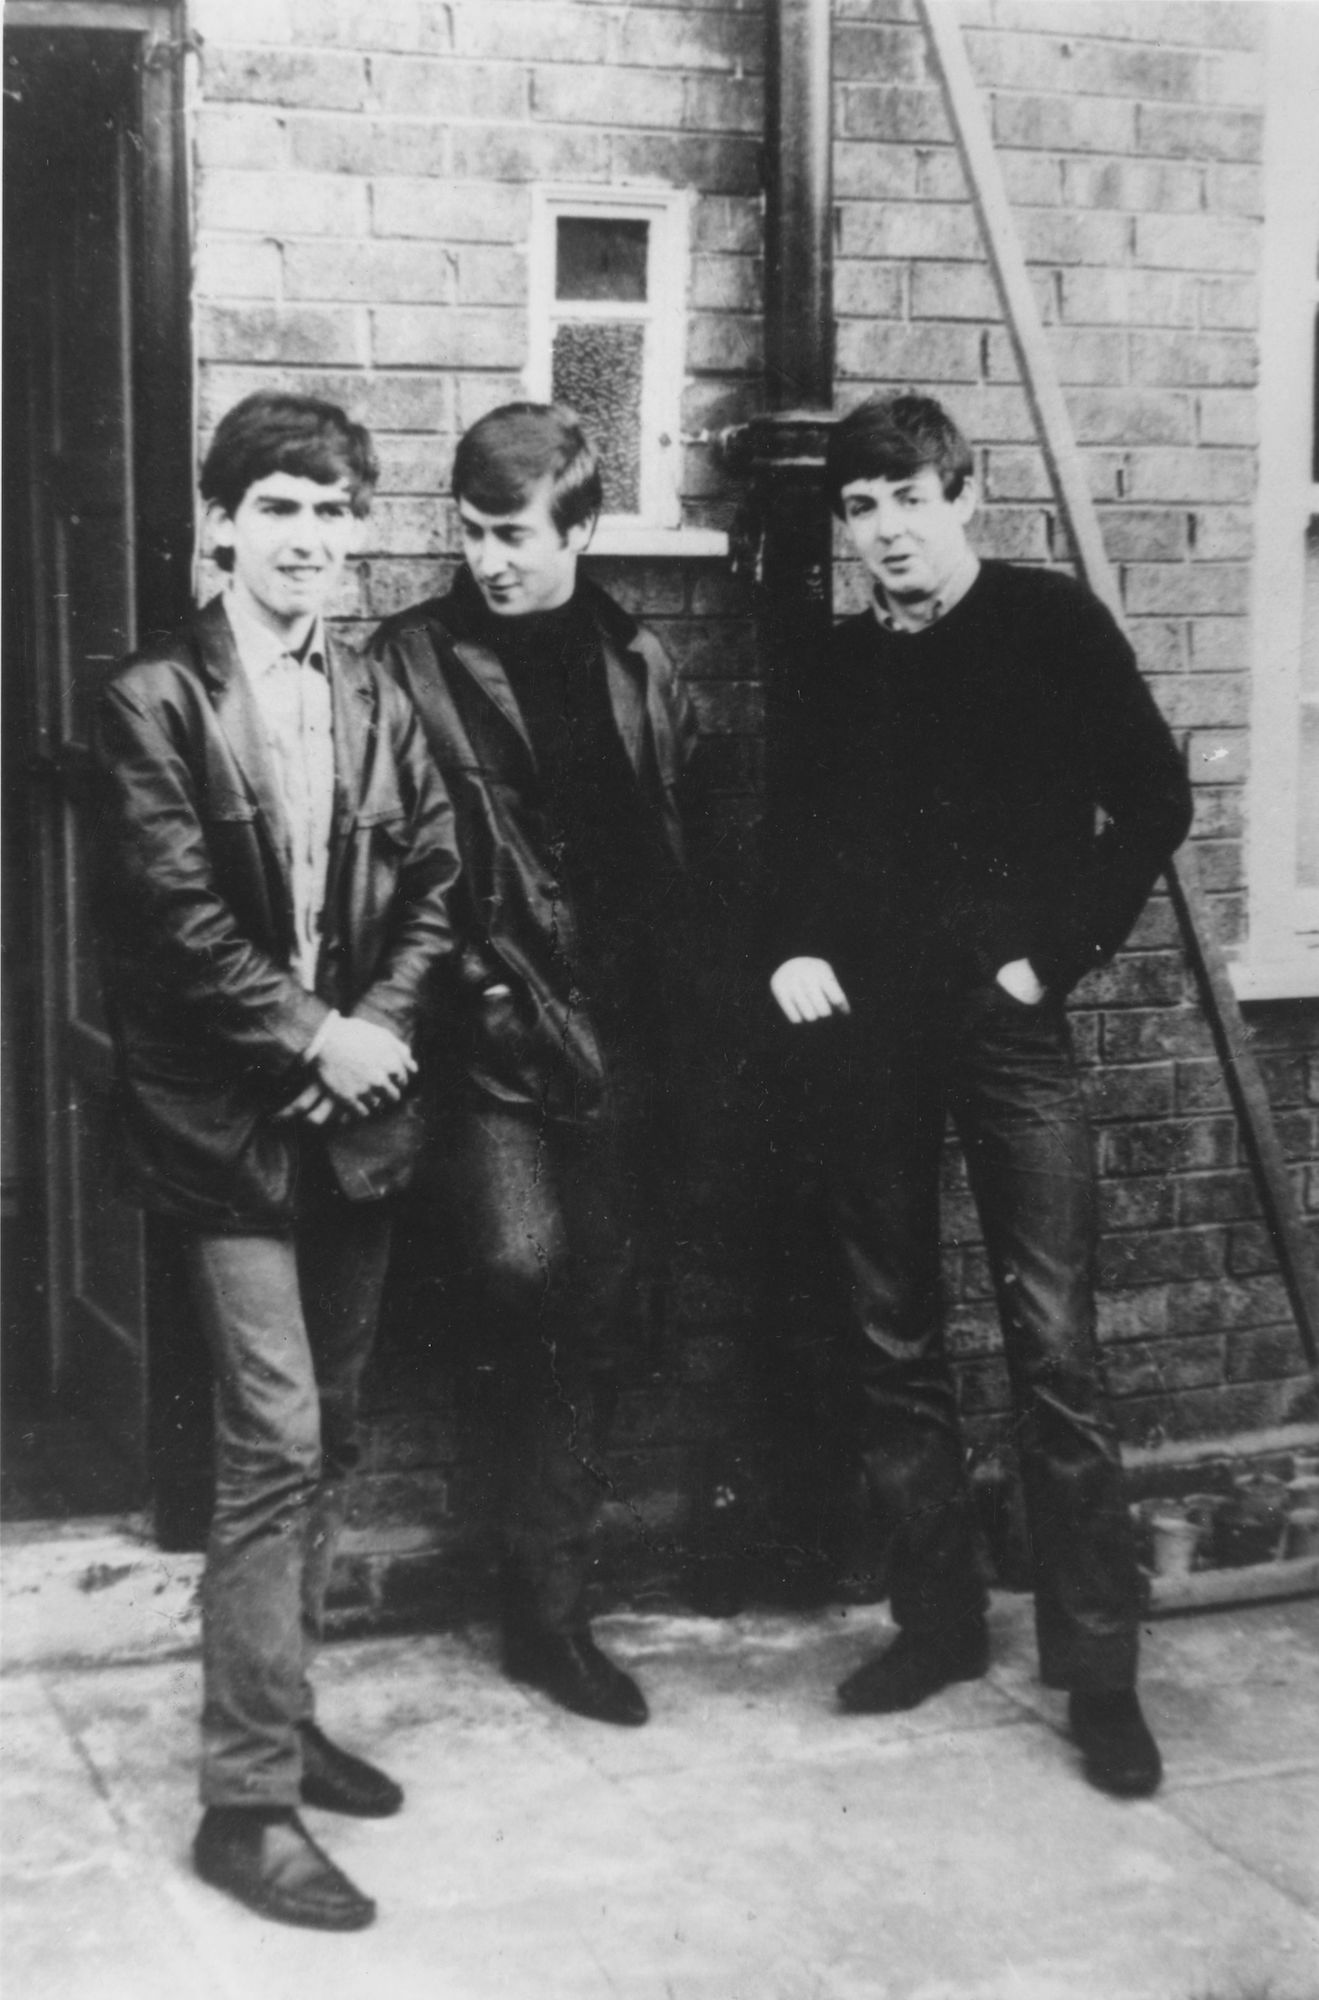 Liverpudlian skiffle beat band The Beatles standing outside Paul's Liverpool home